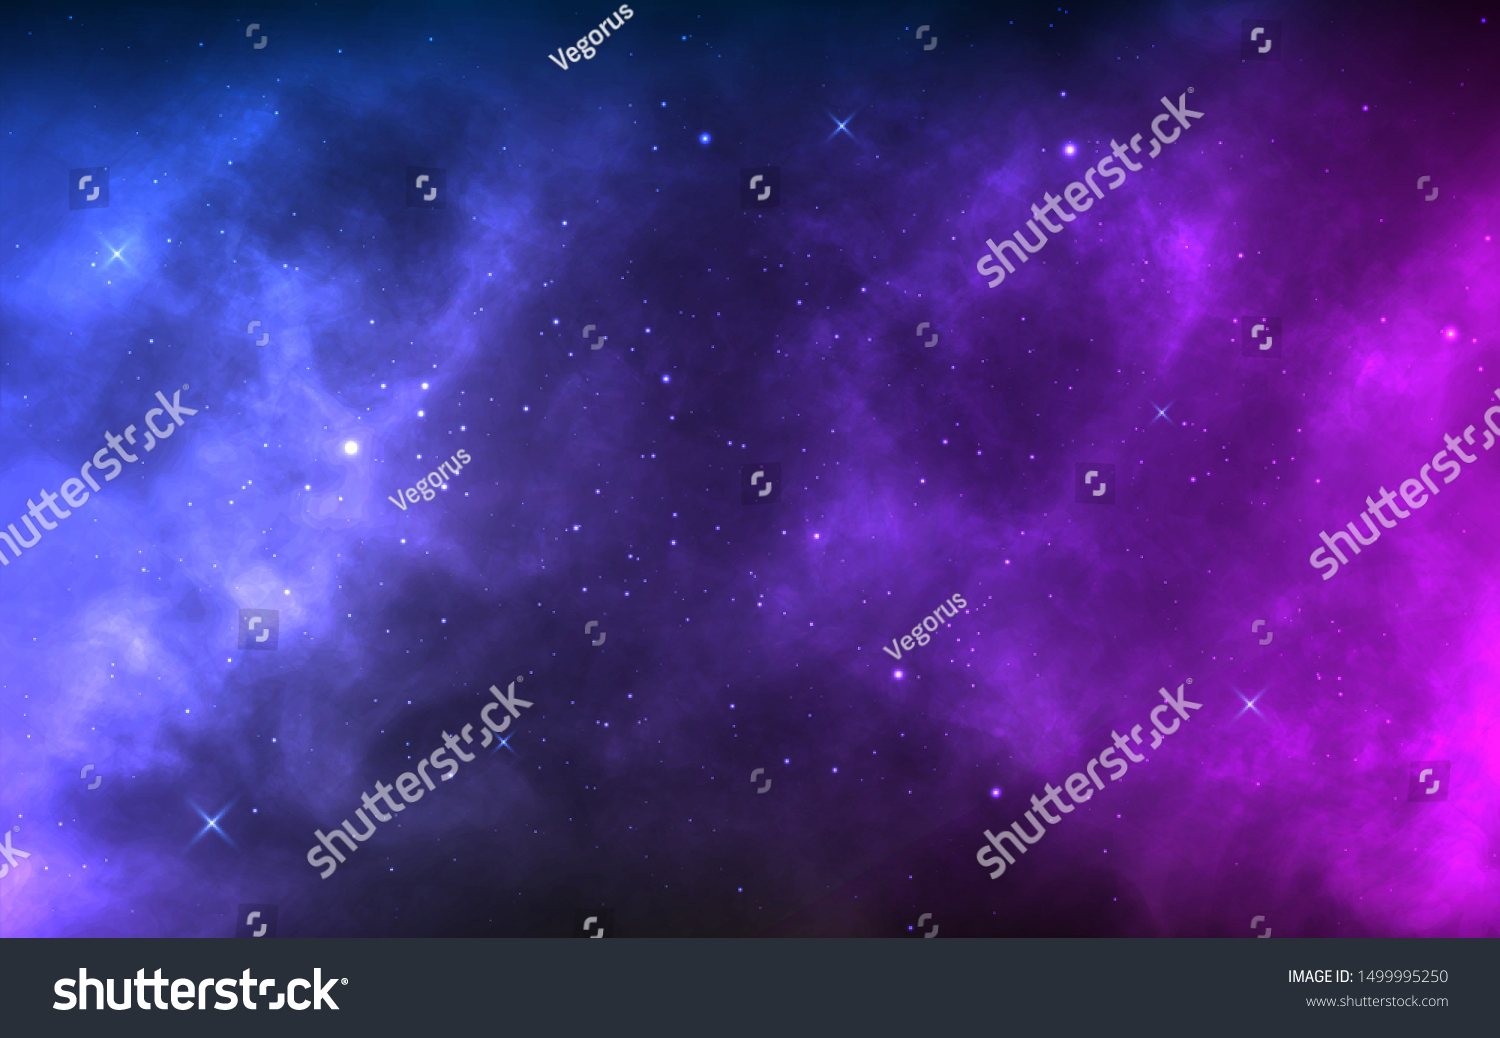 Space background with realistic nebula and shining stars. Colorful cosmos with stardust and milky way. Magic color galaxy. Infinite universe and starry night. Vector illustration. #1499995250